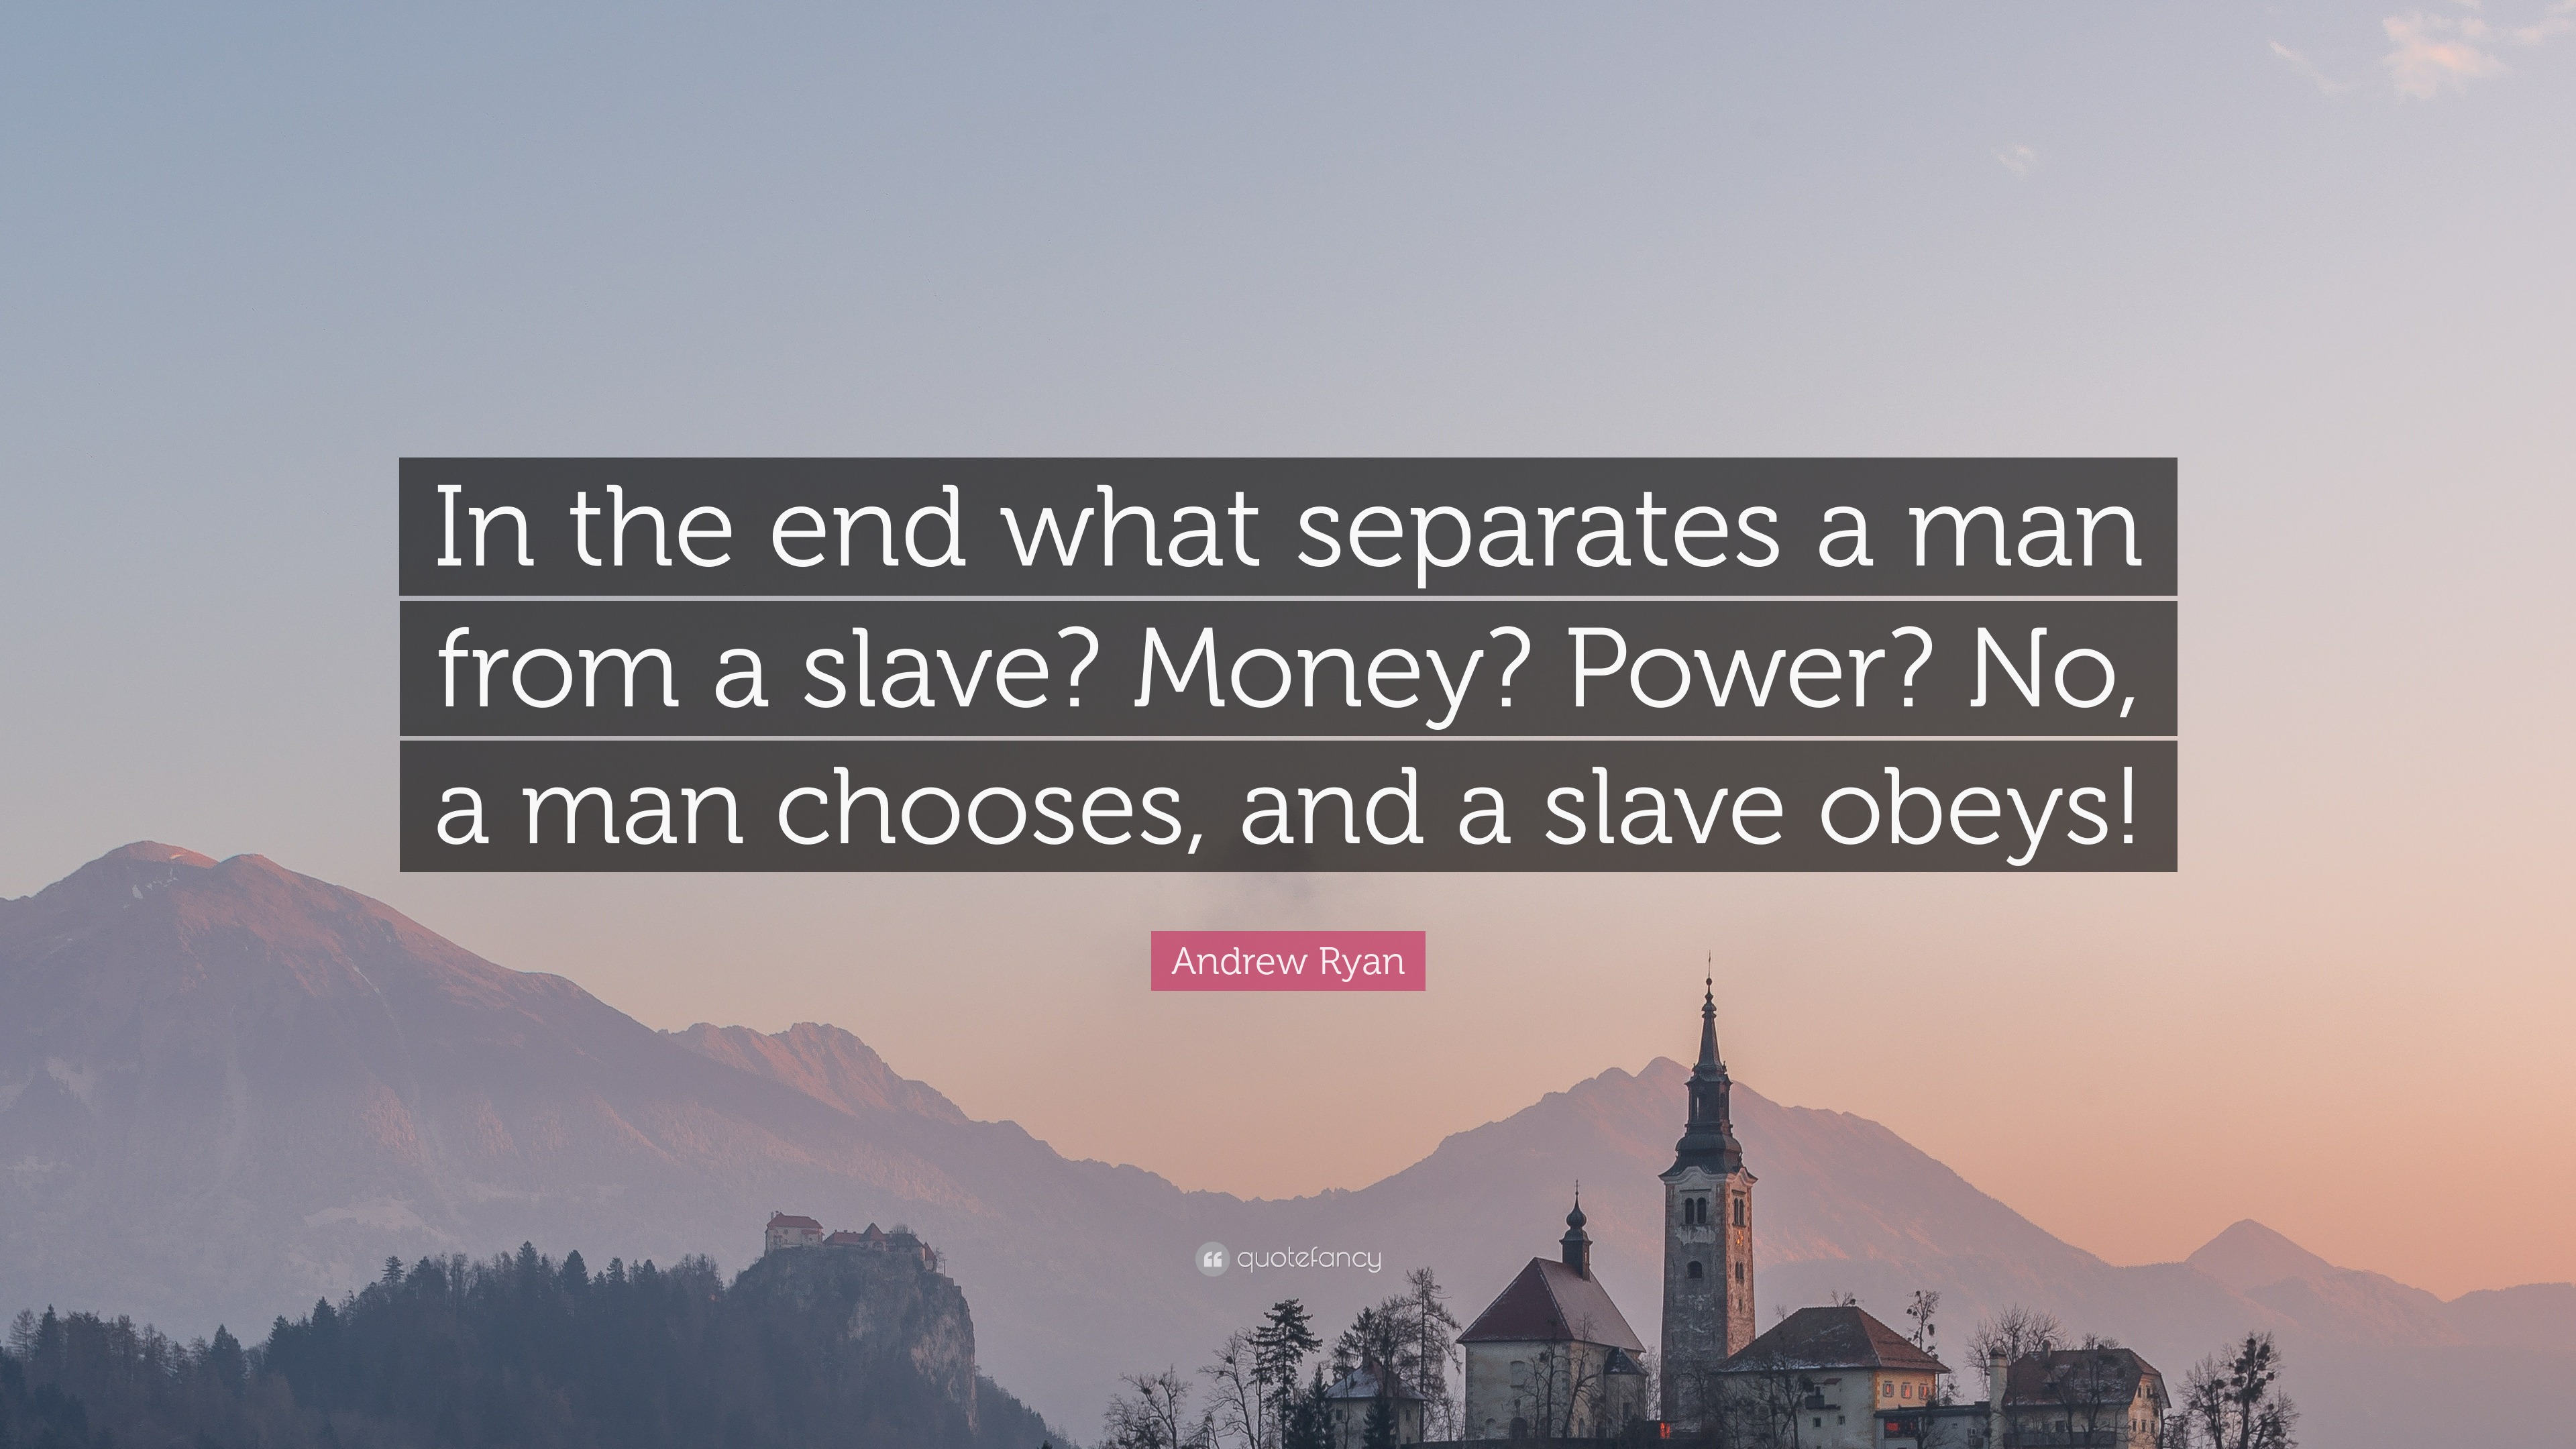 Andrew Ryan Quote: "In the end what separates a man from a slave? Money? Power? No, a man ...